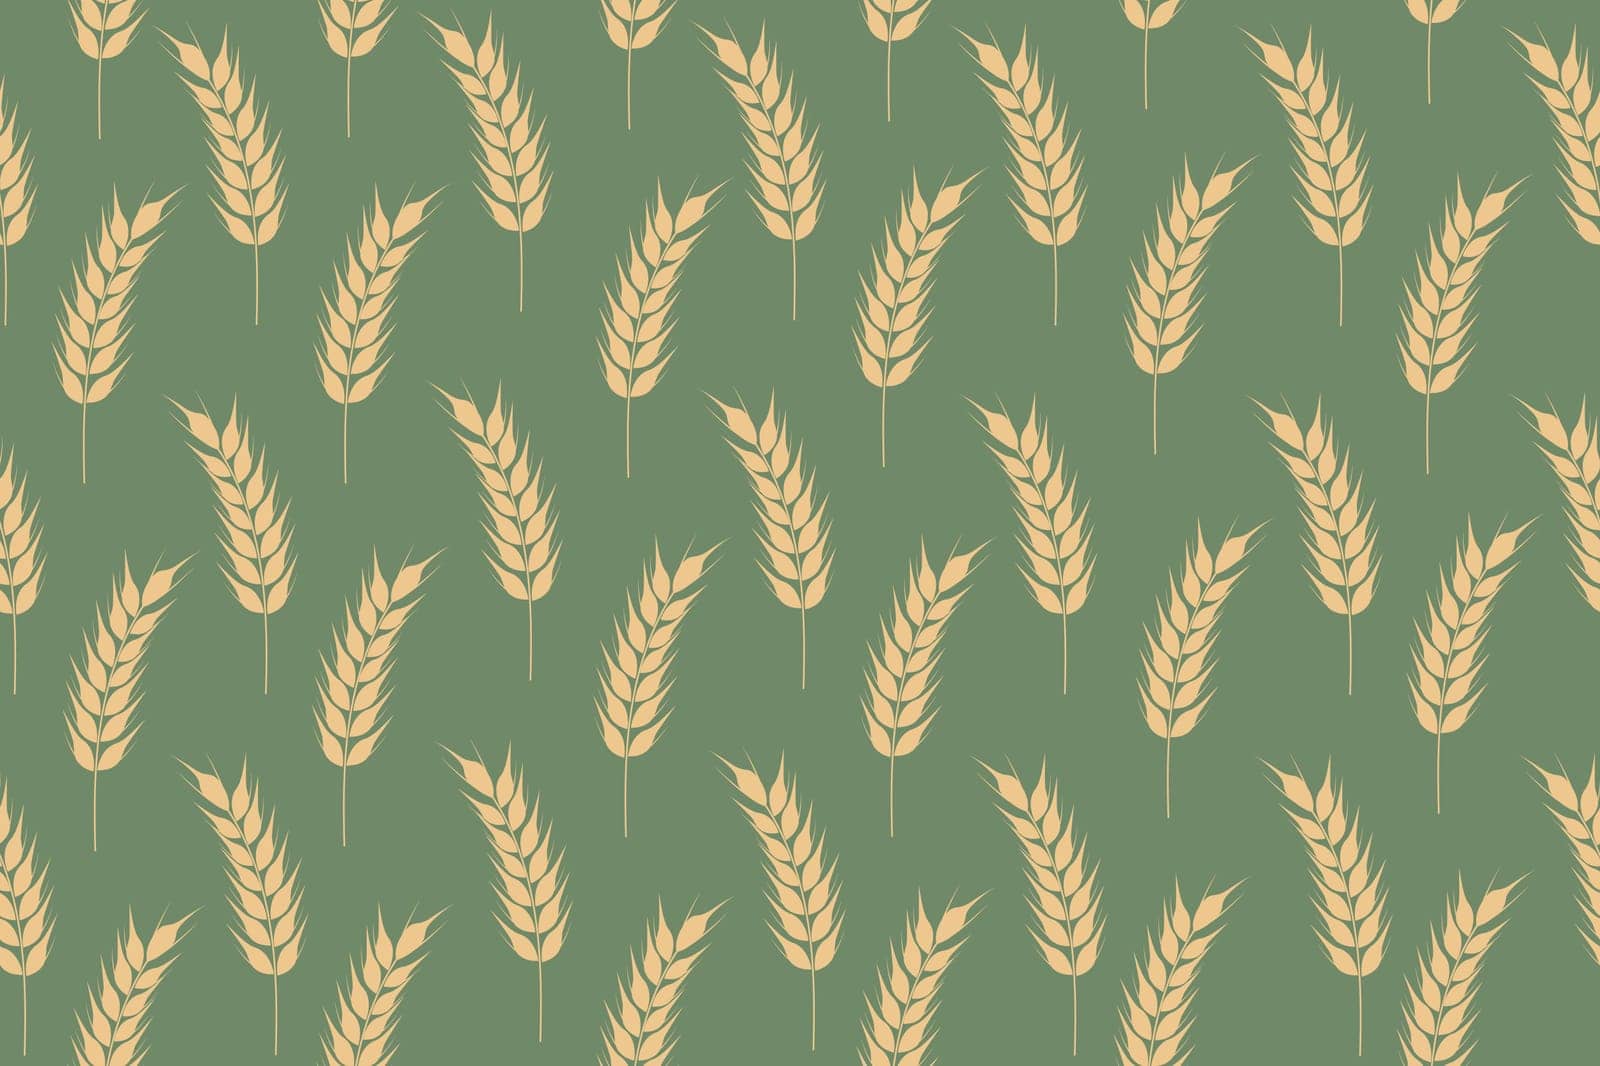 Collection of golden ripe spikelets of wheat. Agricultural symbol, flour production. Vector silhouette of wheat. Illustration on a green background. Vector